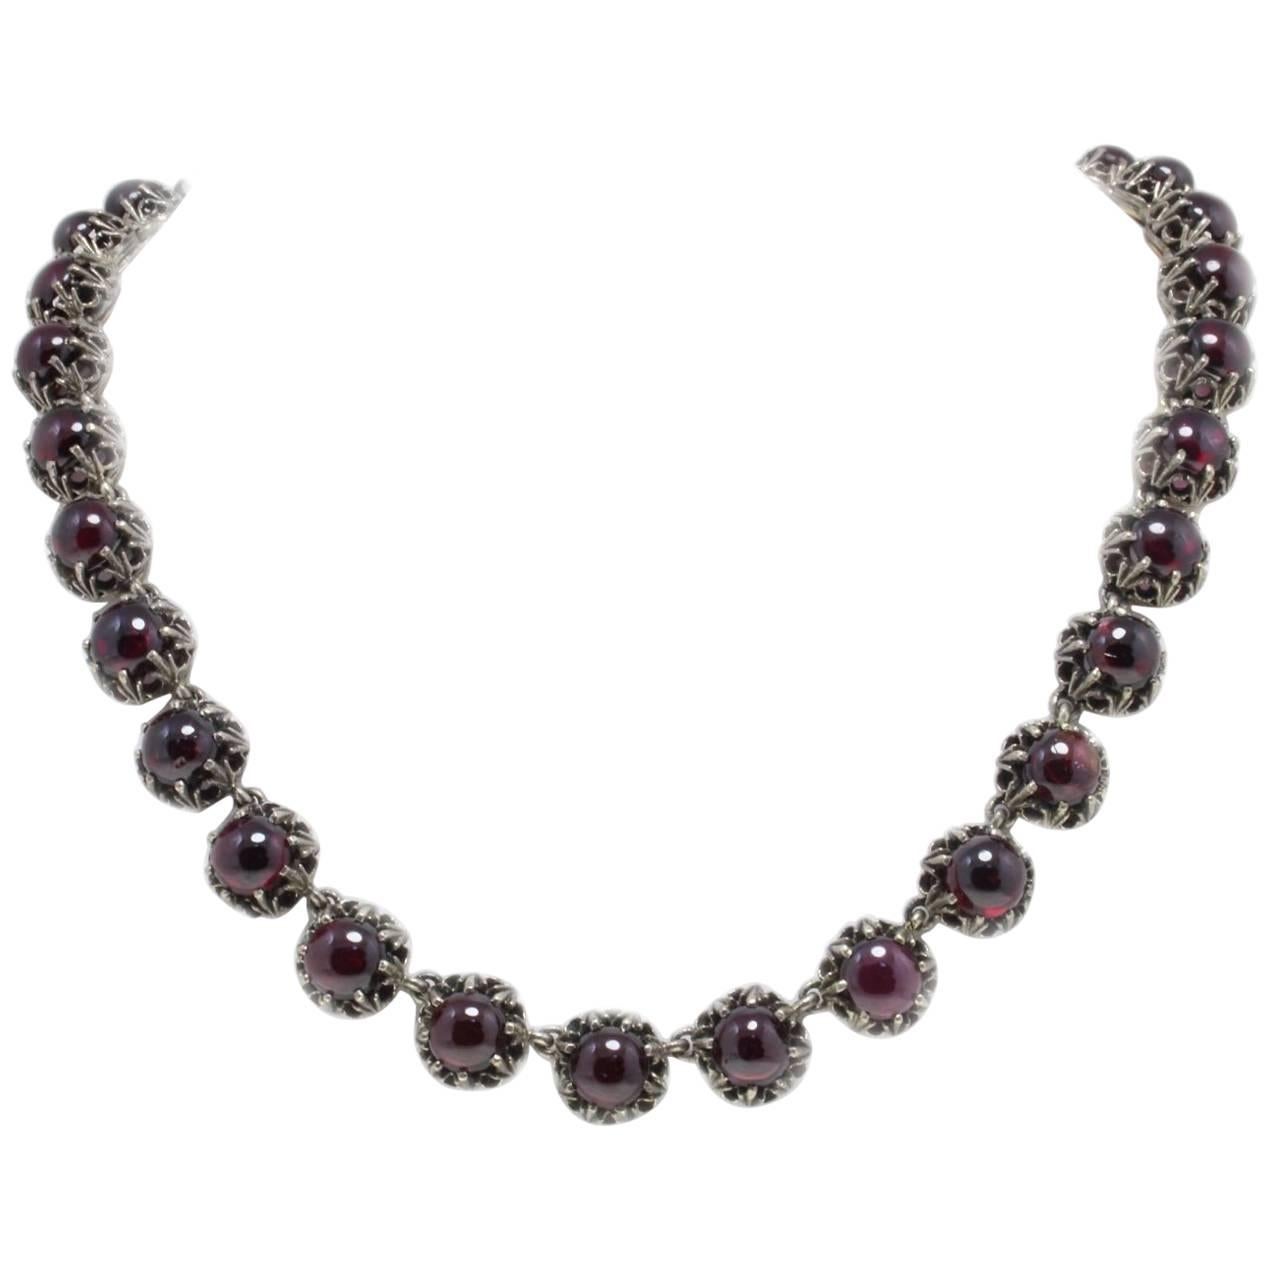  Garnets Rose Gold and Silver Link Necklace